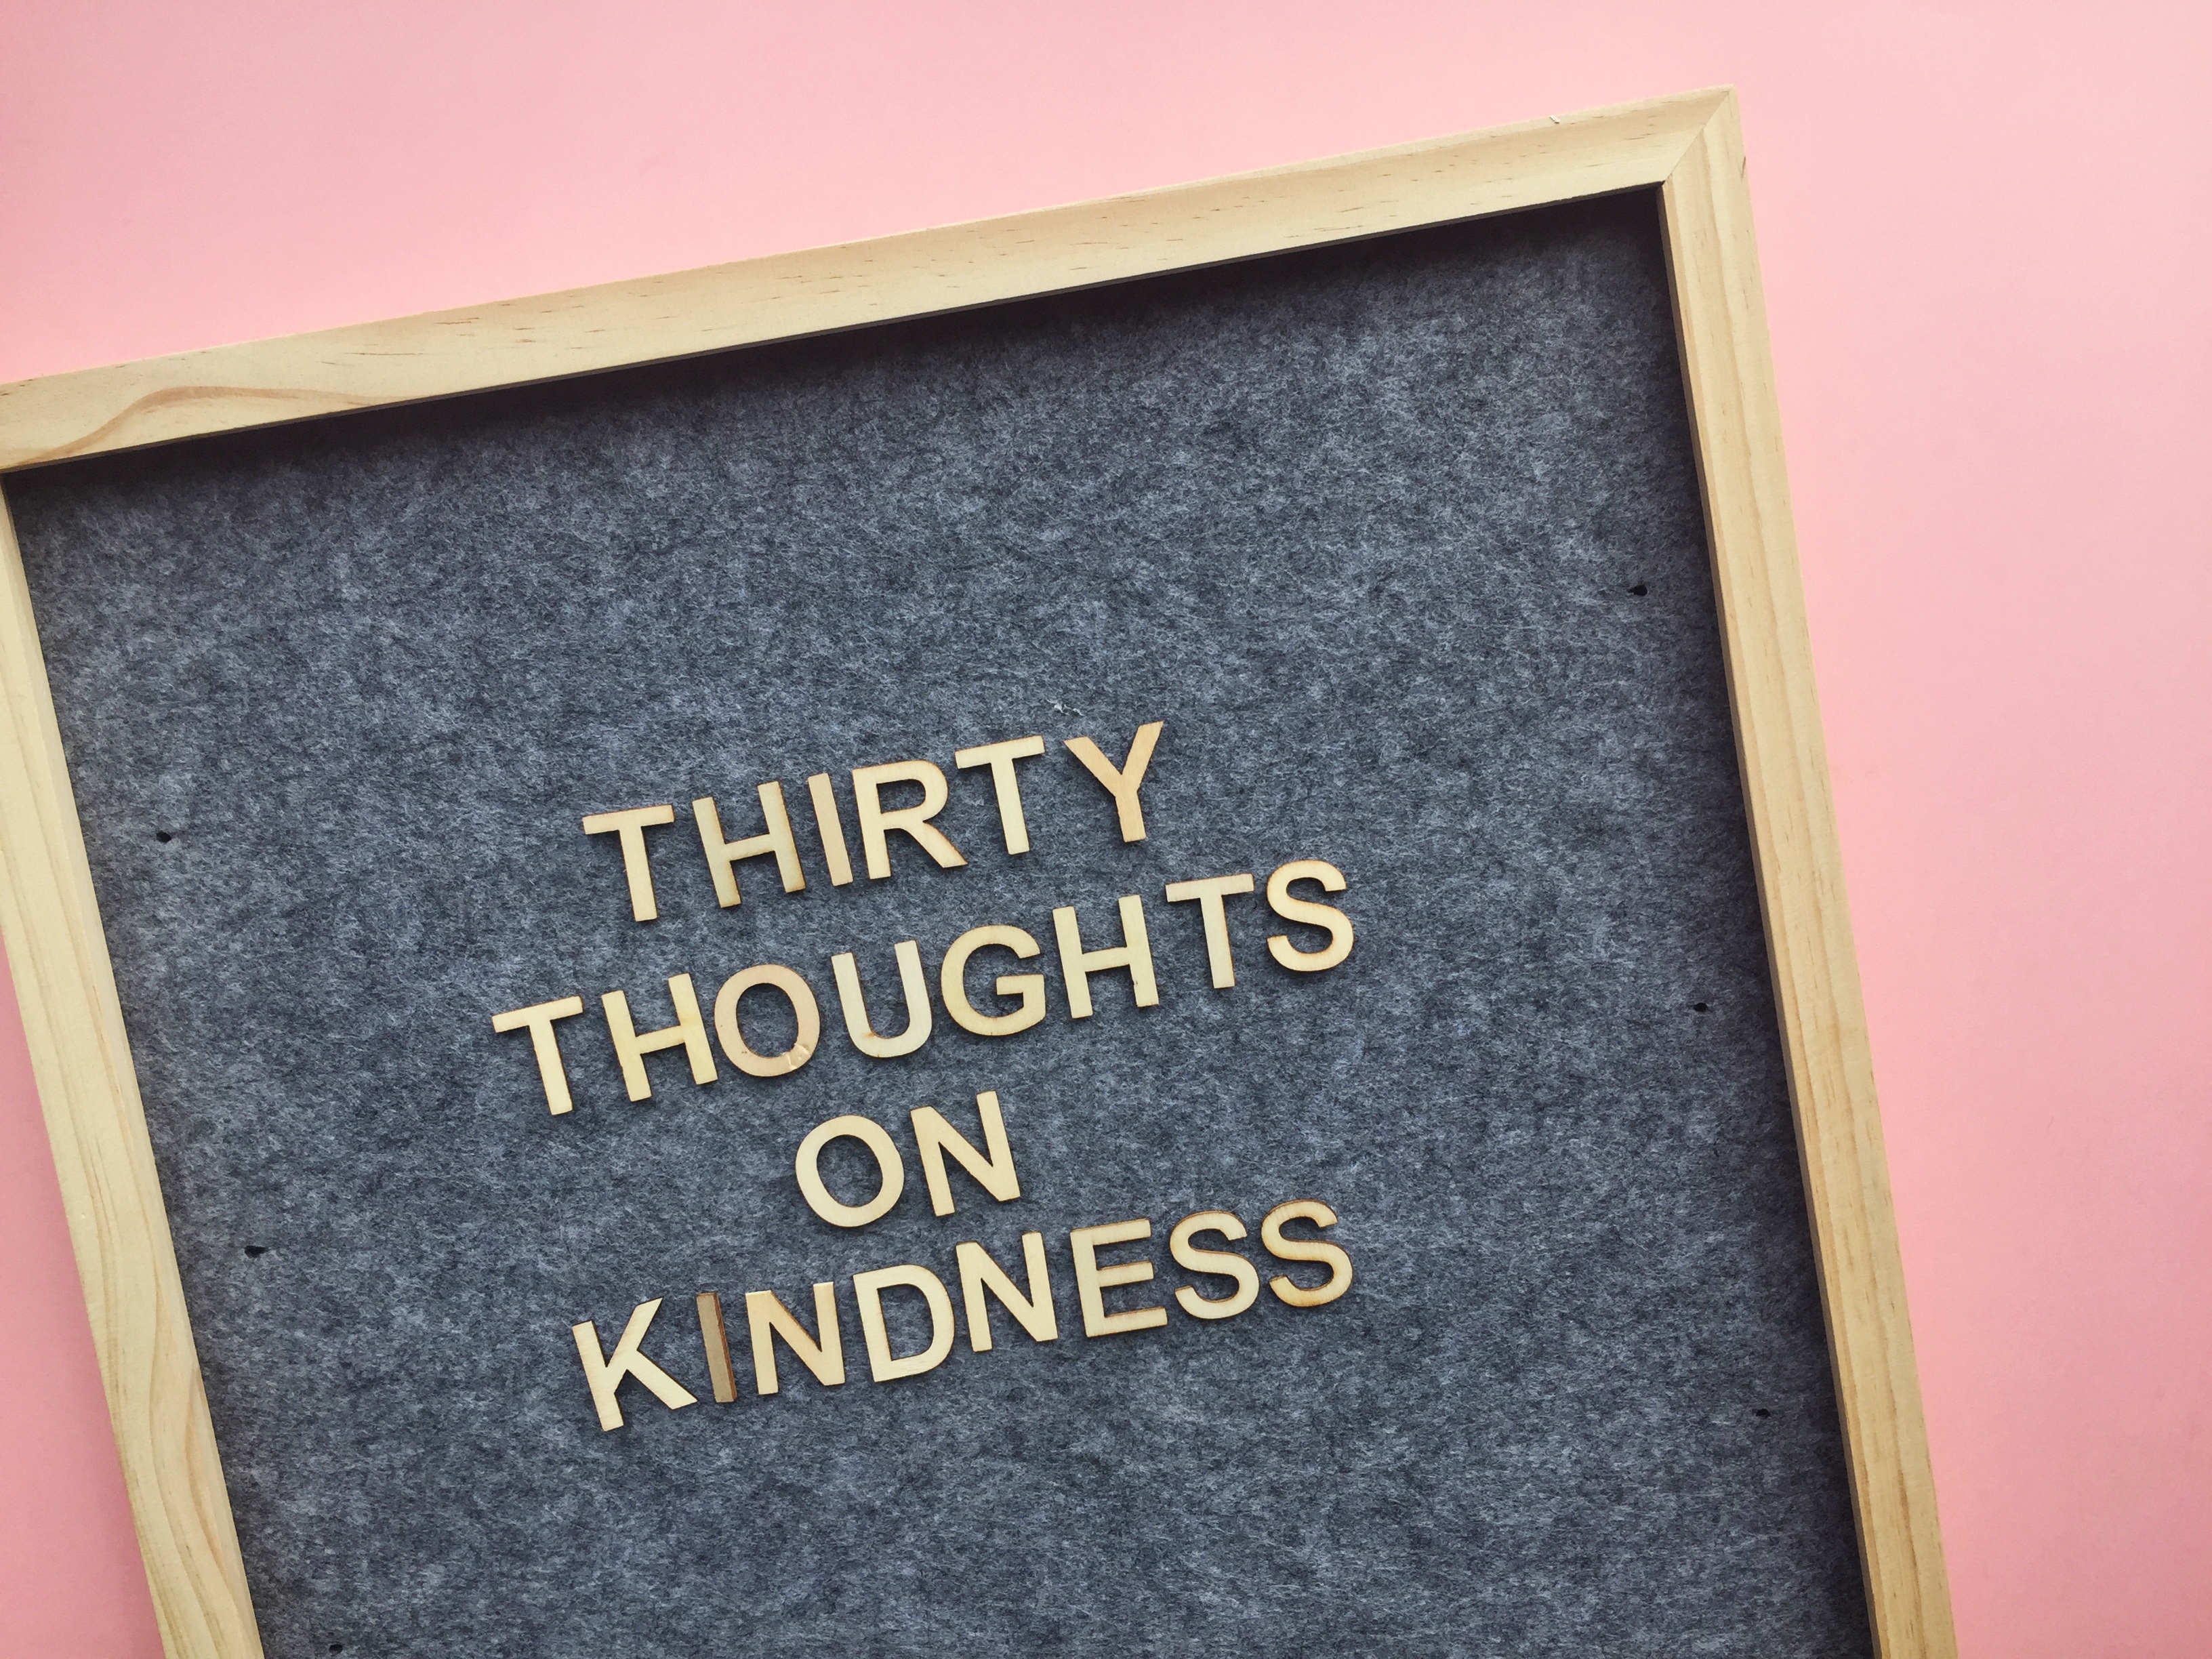 30 Thoughts on Kindness